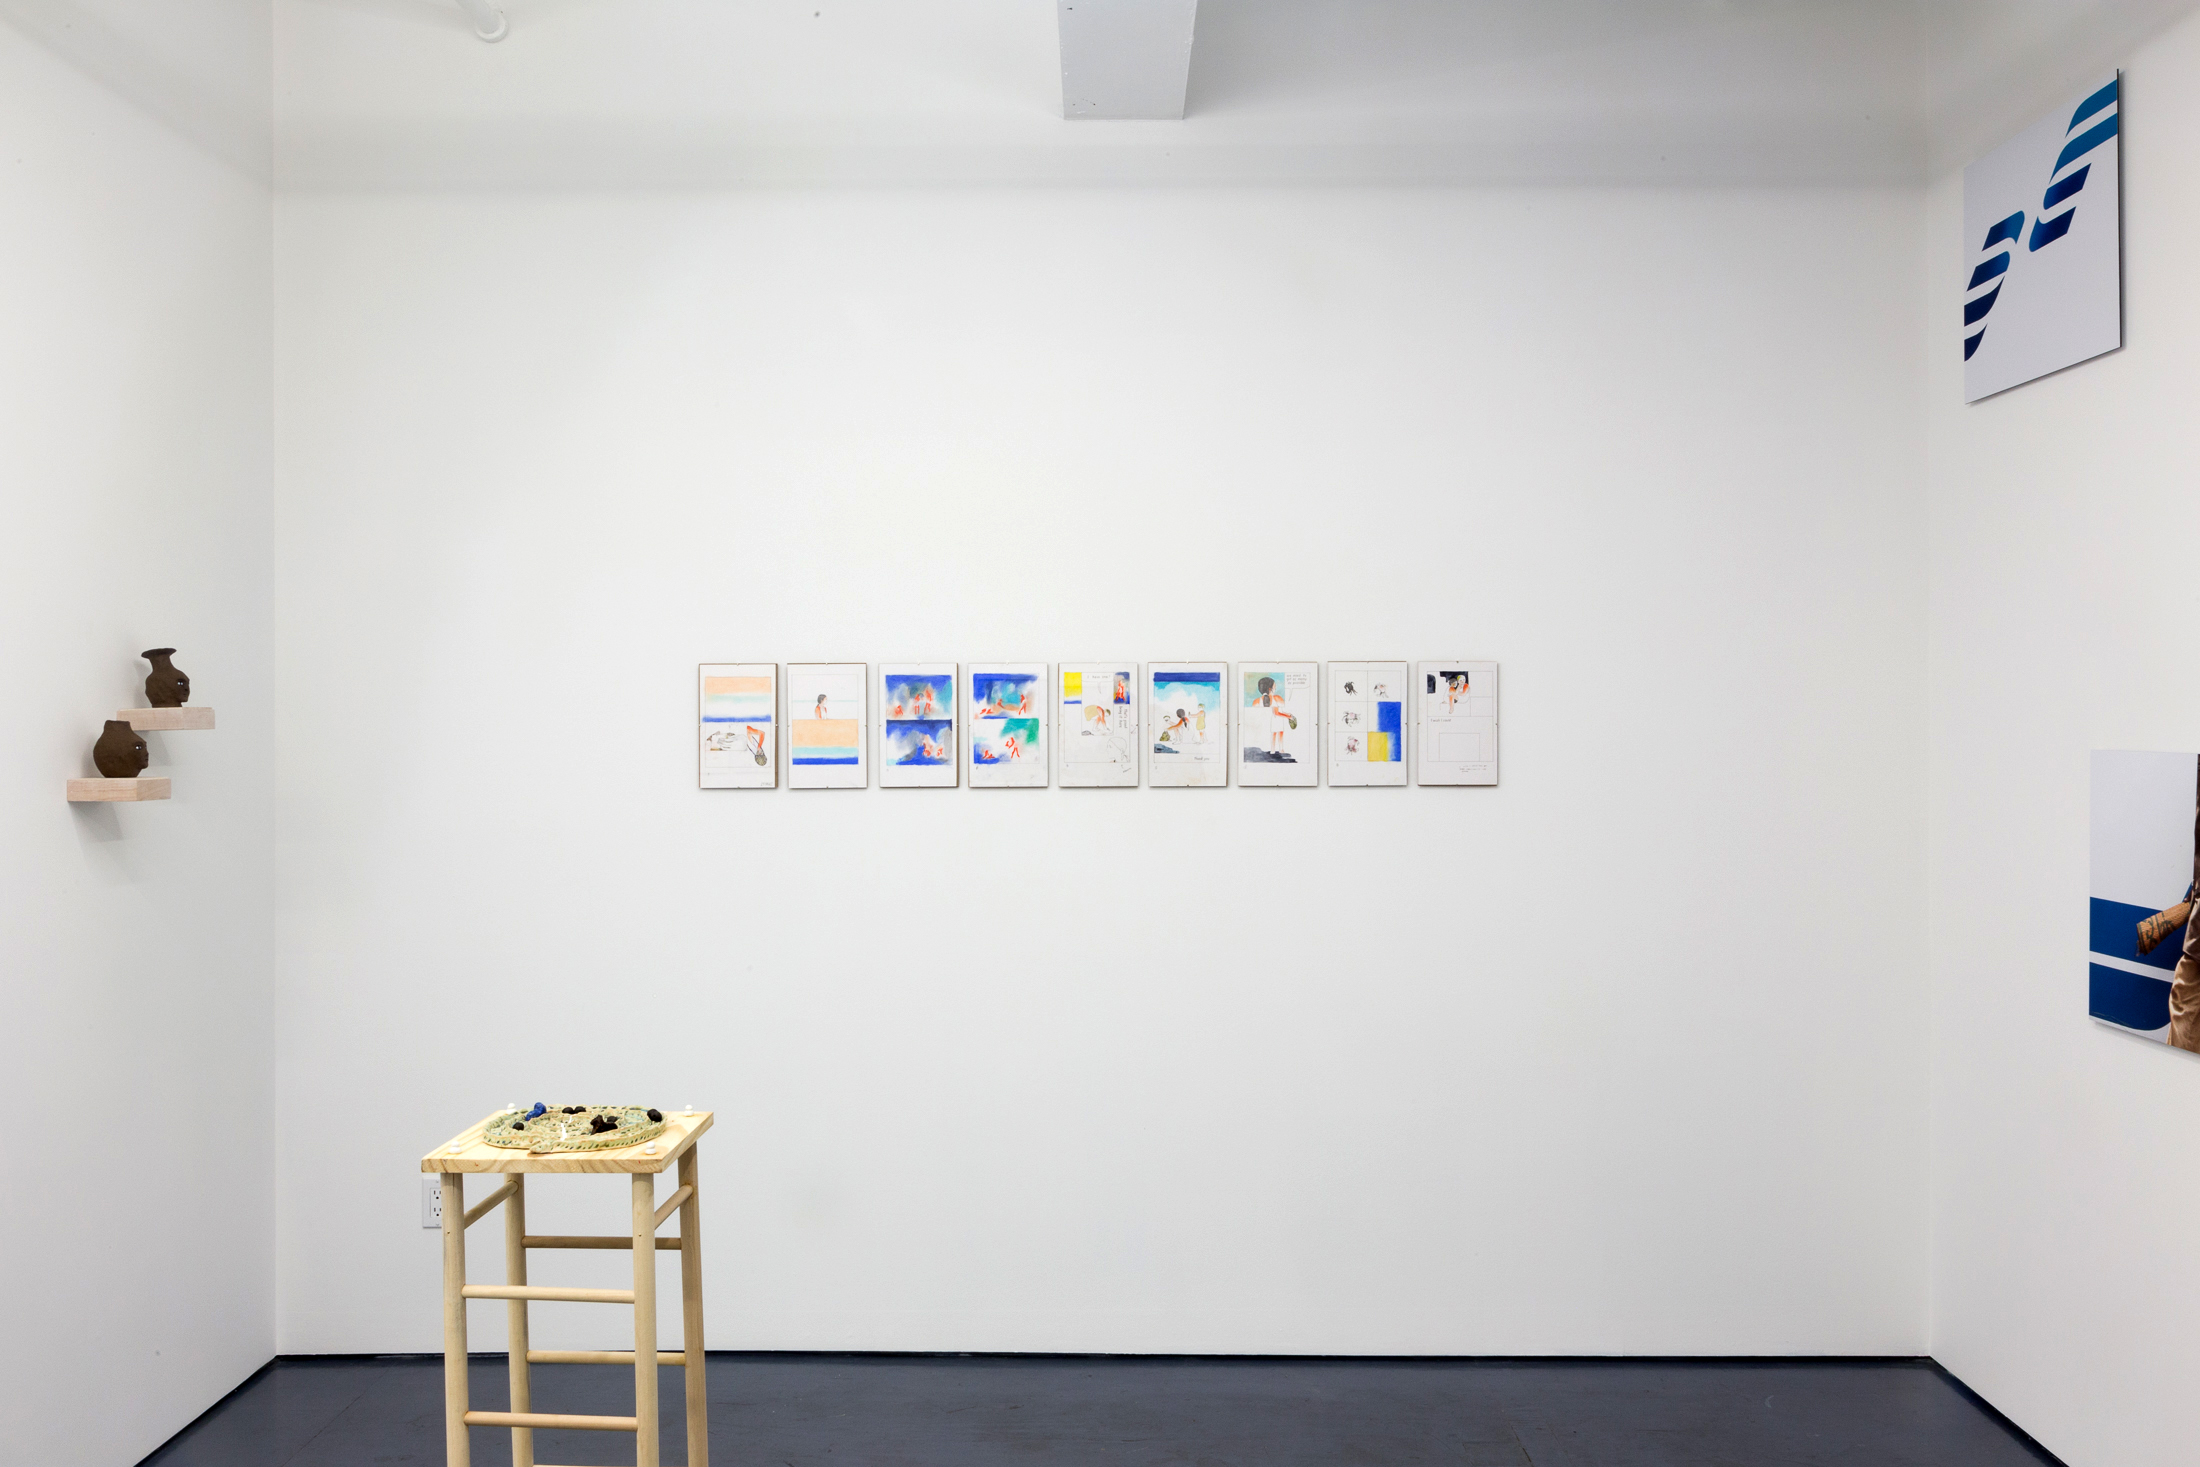  Installation view of the exhibition In Search Of by Aidan Koch and Dawit L. Petros at Transmitter 